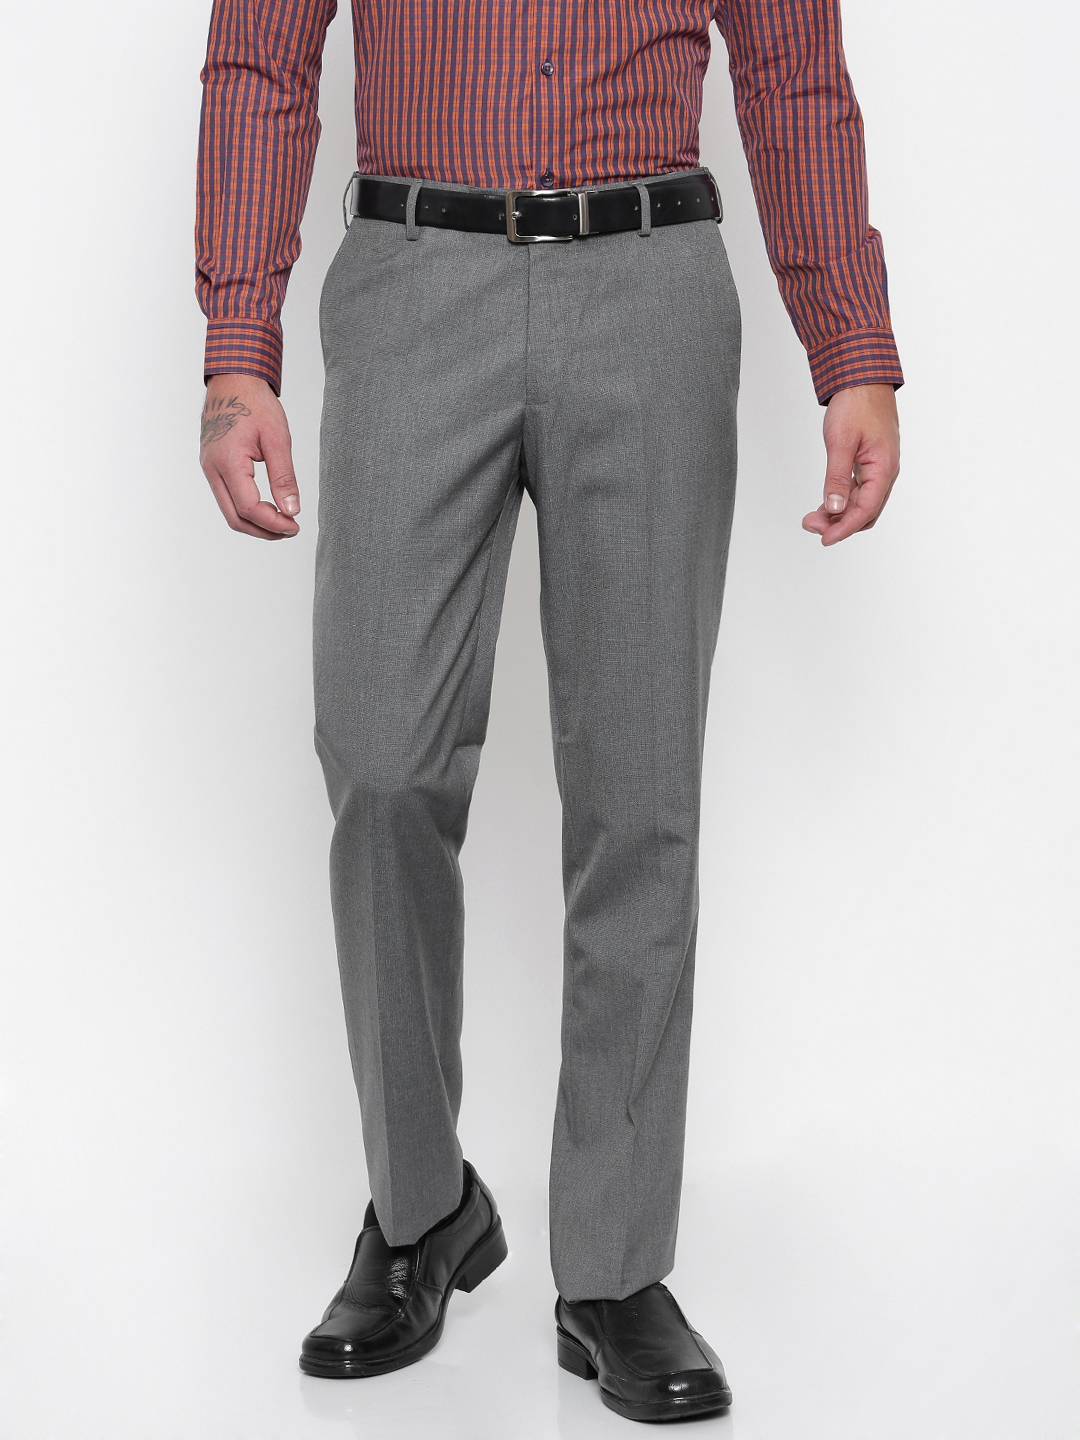 Formal Trousers for Men: Look smart in tailored trousers | - Times of India-saigonsouth.com.vn